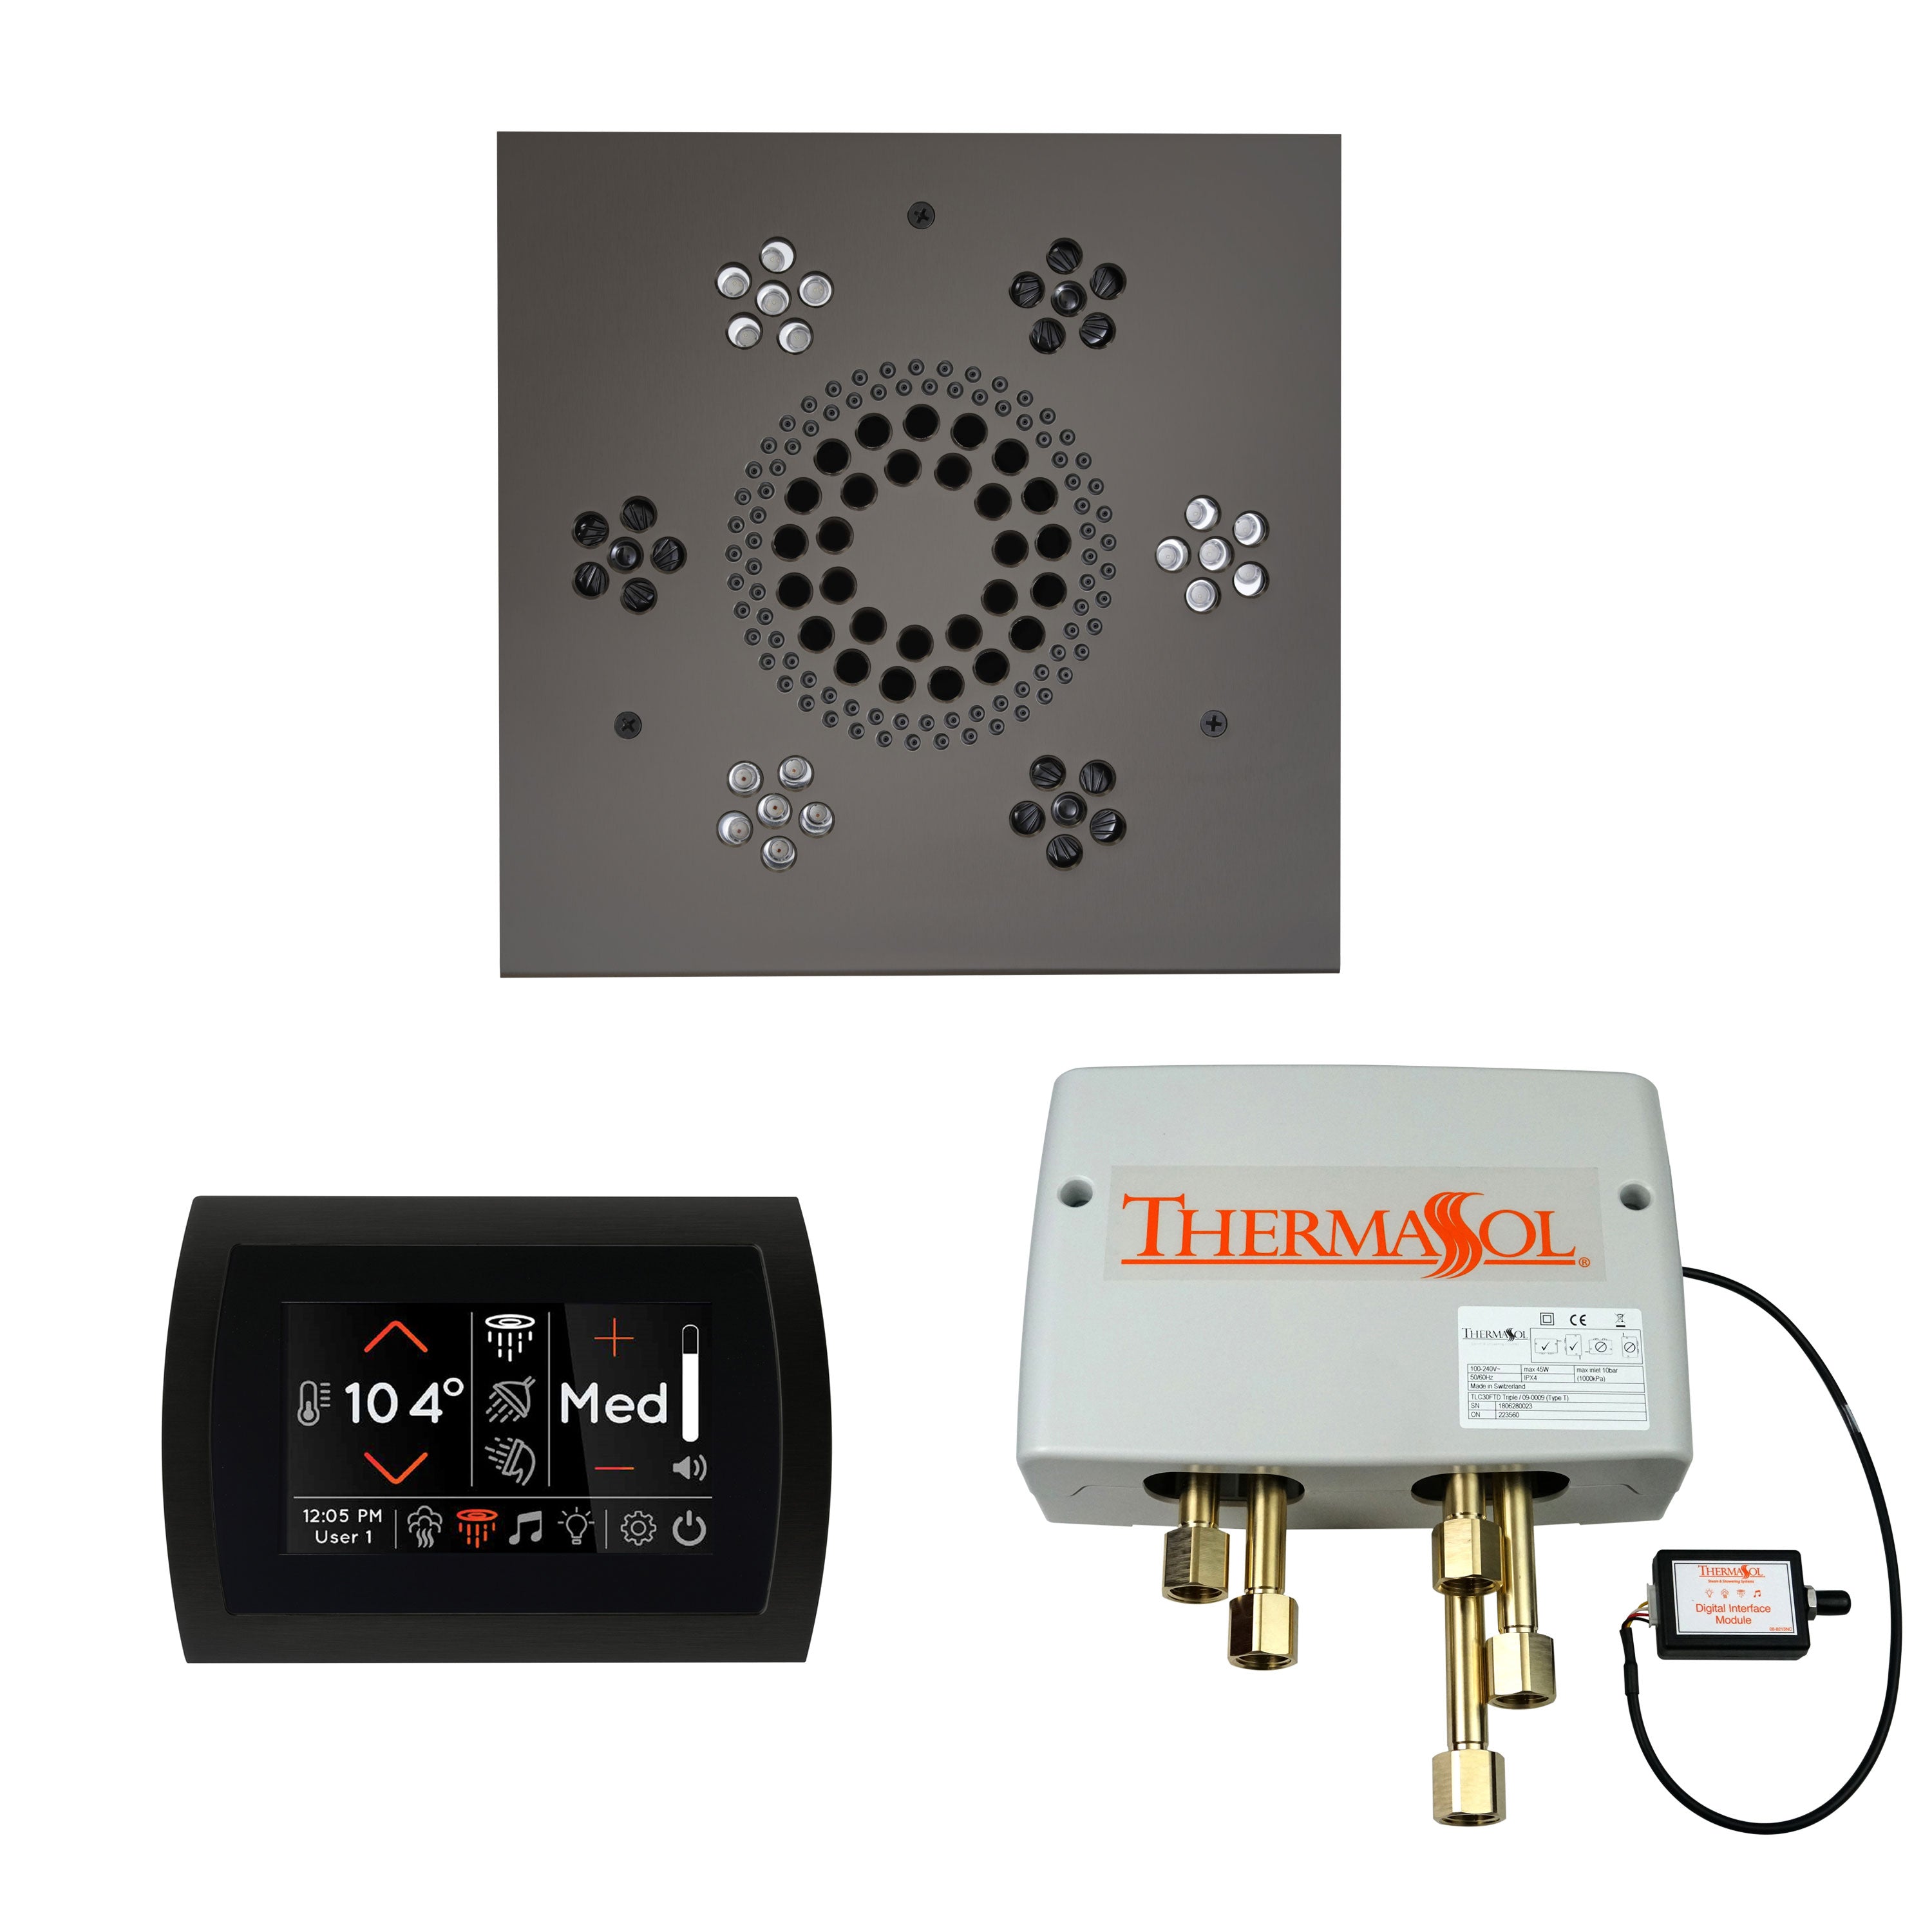 ThermaSol Shower Kit - The Wellness Shower Package with SignaTouch